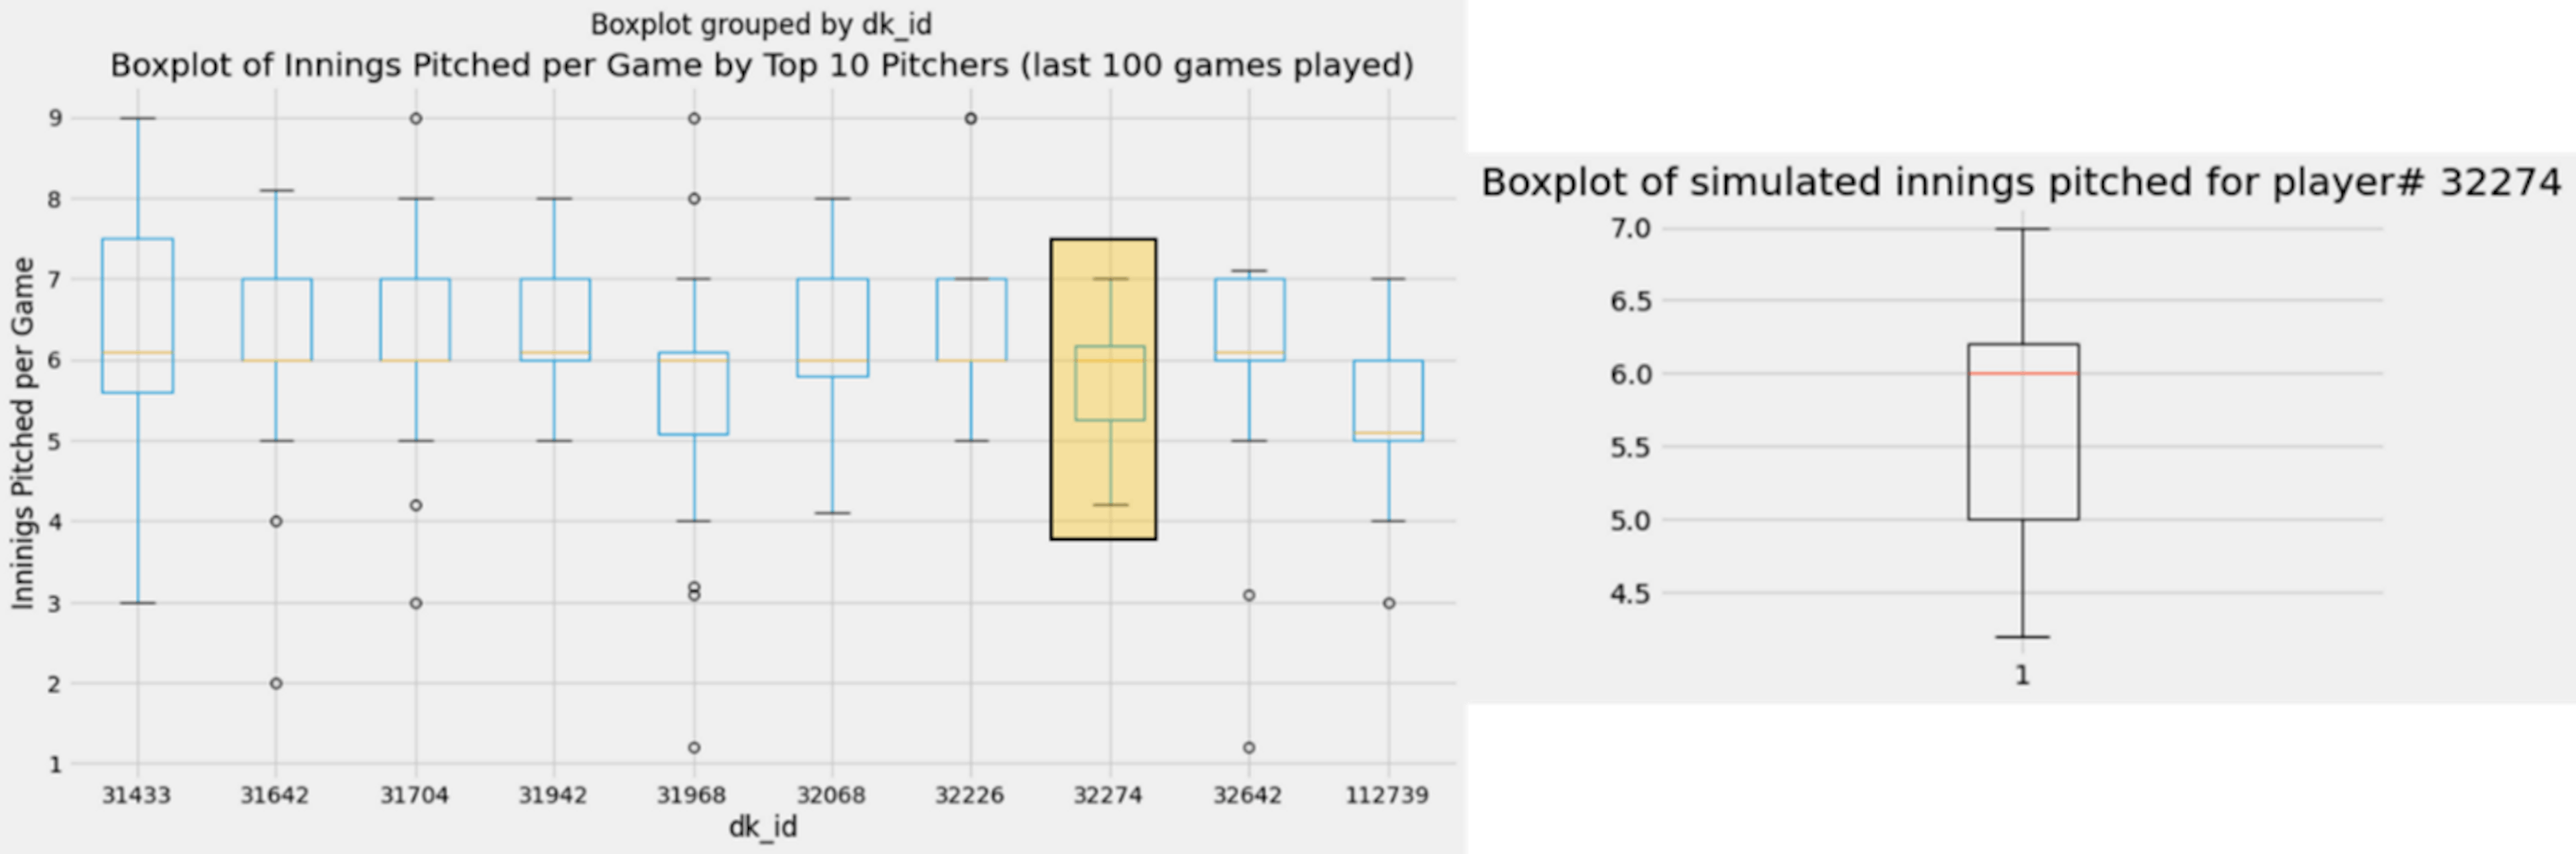 Image by Author: Innings pitched by a MLB pitcher simulation vs actual.